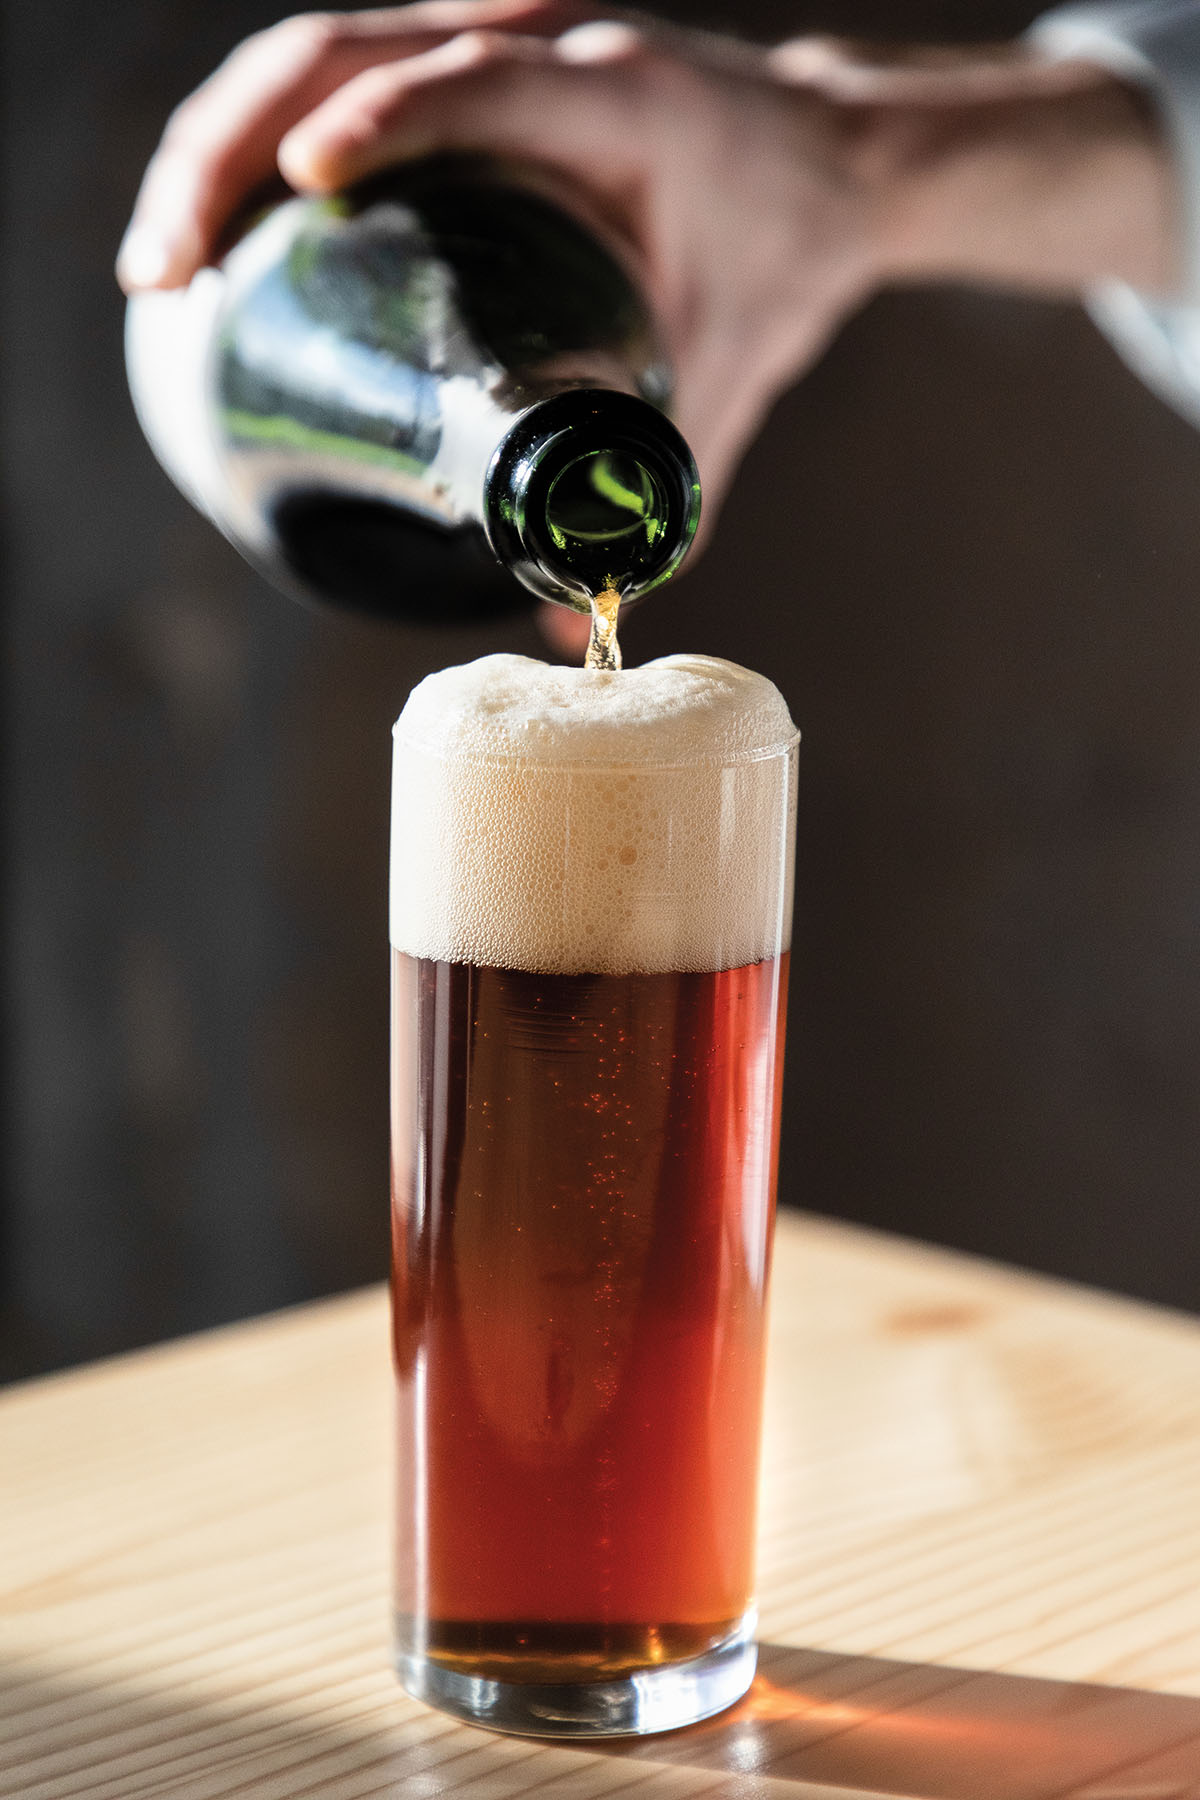 A bright red-brown beer is poured into a tall glass from a green bottle